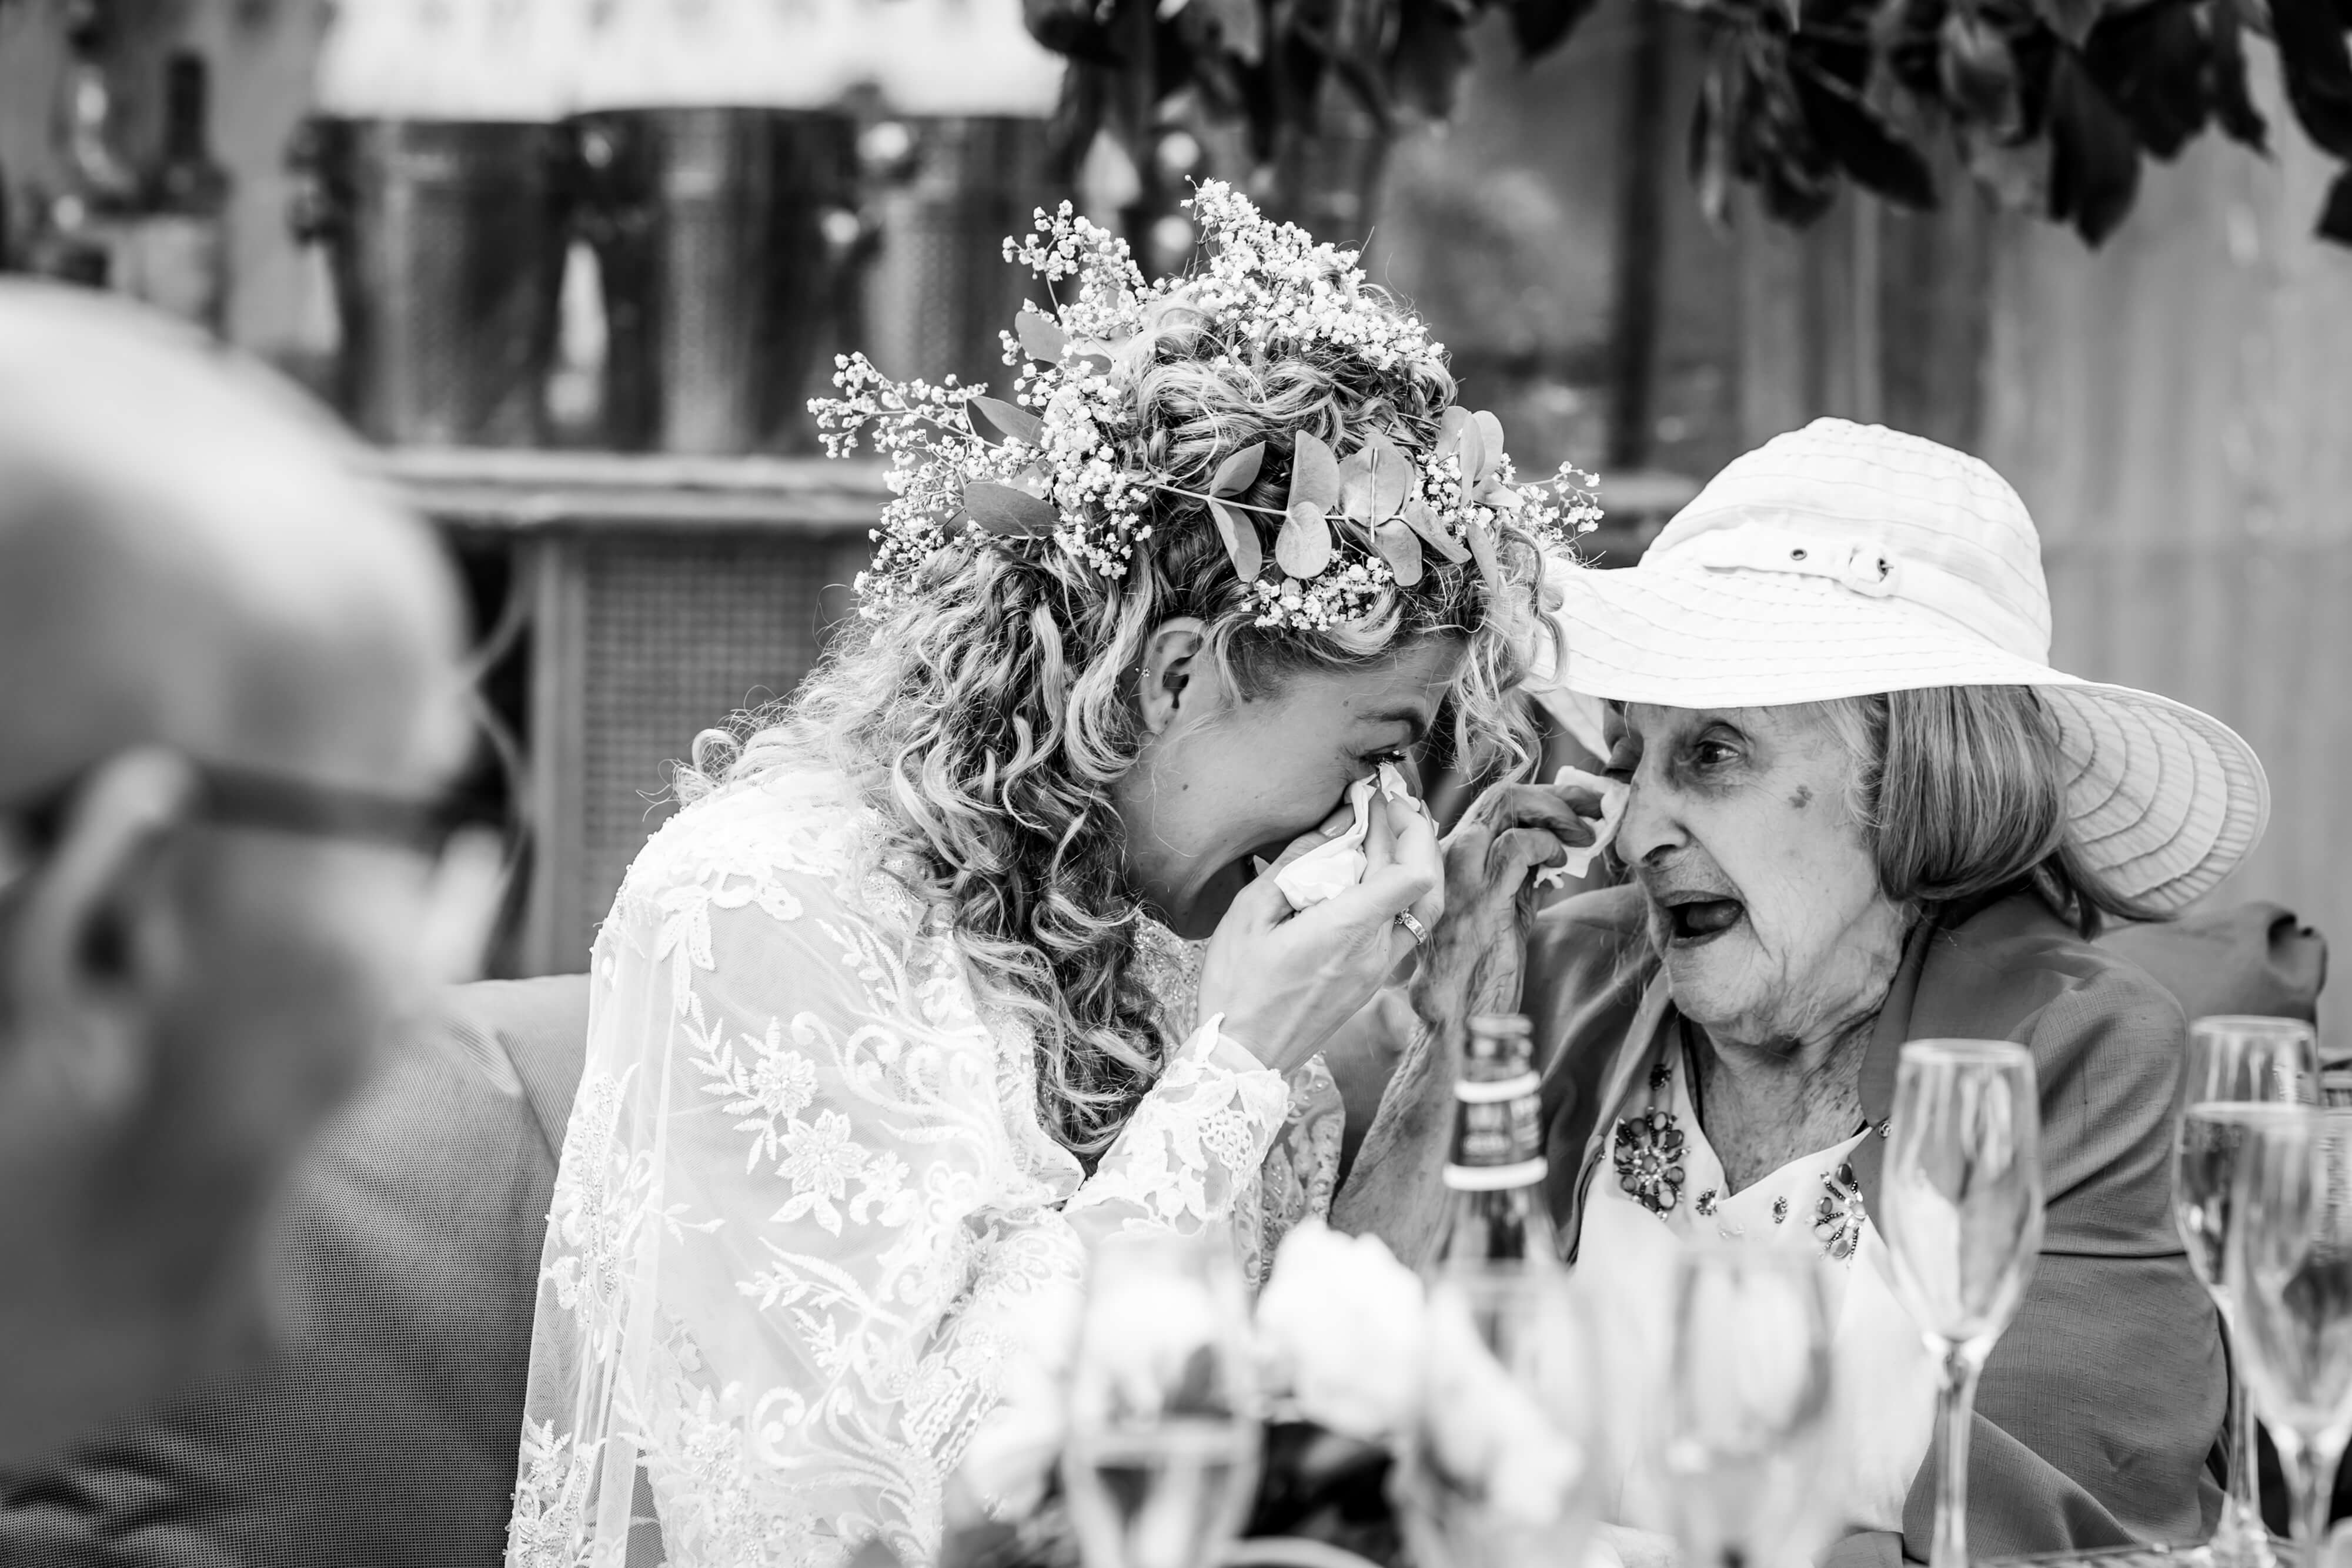 Bride in floral headpiece emotionally conversing with elderly guest